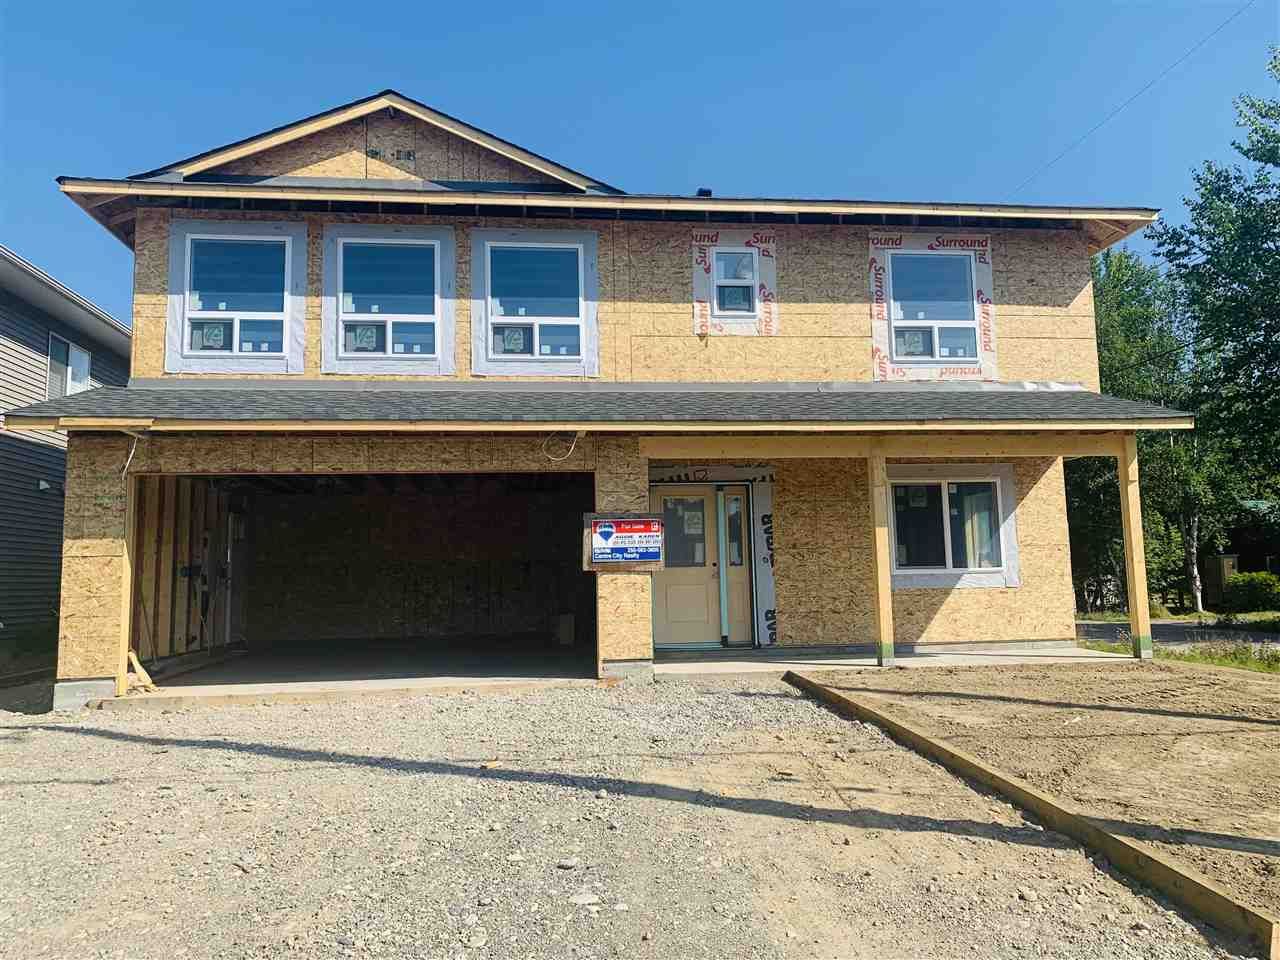 Main Photo: 7006 HILLU Road in Prince George: Hart Highway House for sale (PG City North (Zone 73))  : MLS®# R2480746